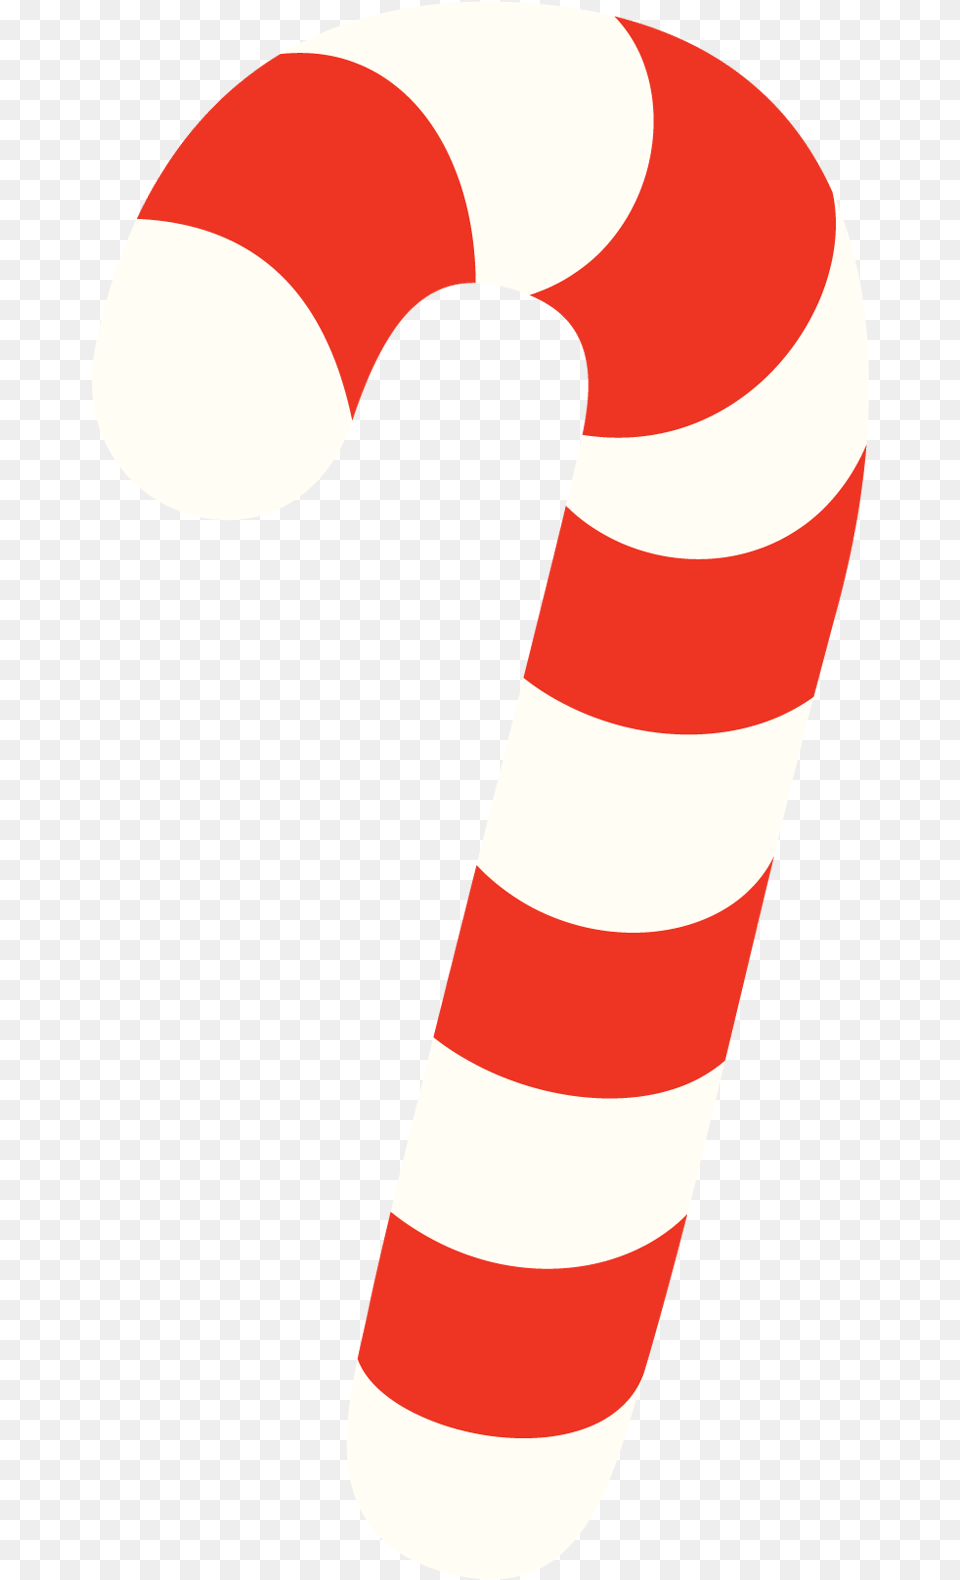 Candy Cane To Use Cliparts Candy Cane Vector, Food, Sweets, Stick, Ketchup Free Png Download